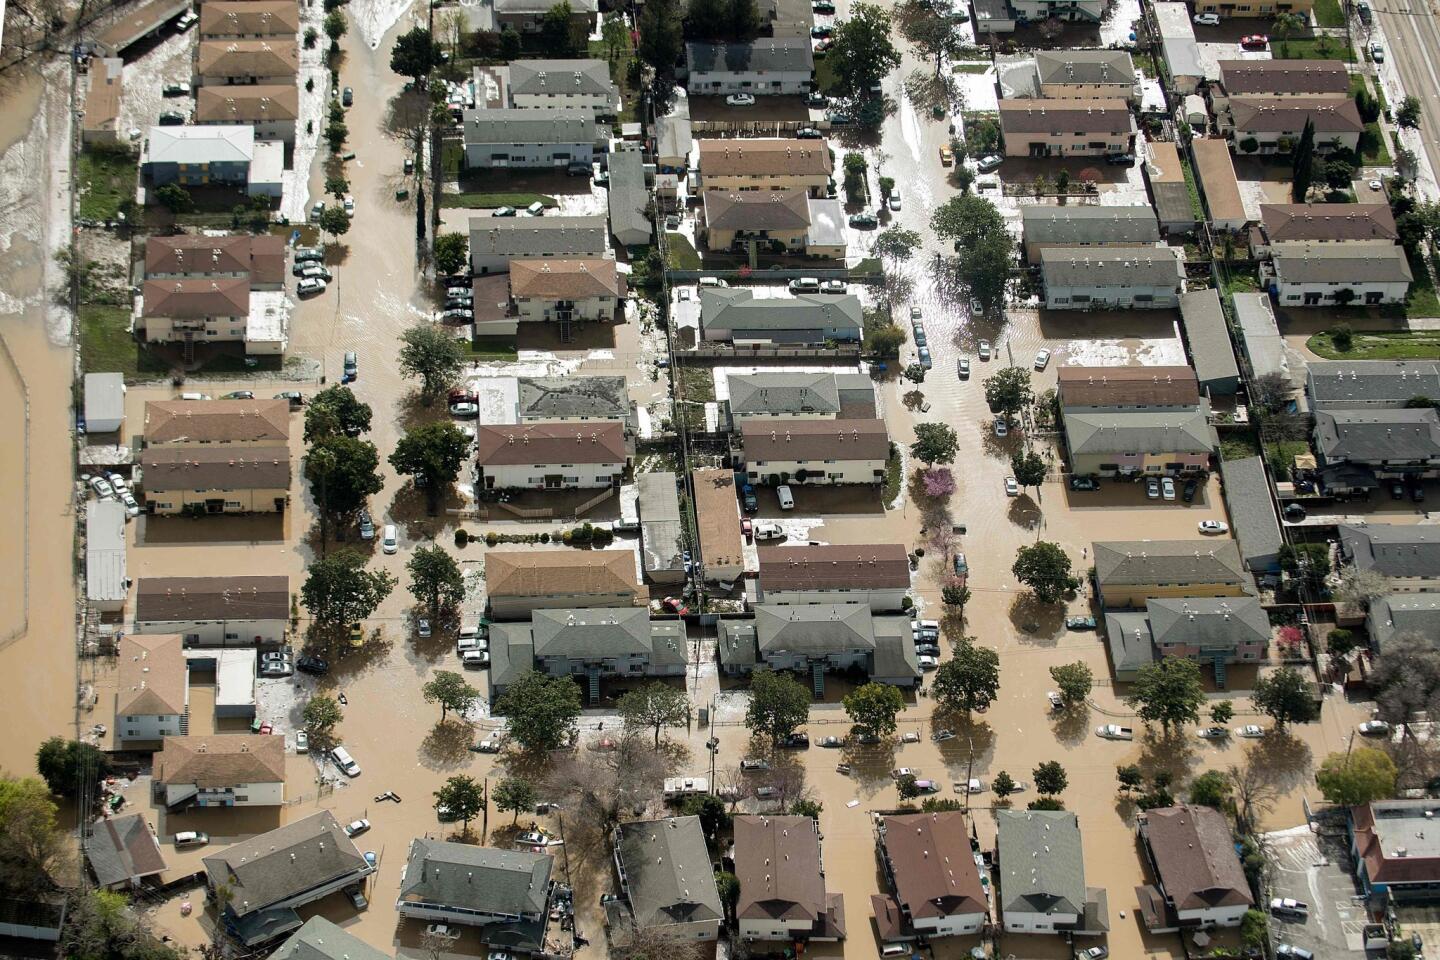 Floodwater surrounds homes in San Jose on Wednesday. Thousands of people were ordered to evacuate their homes as neighborhoods were inundated.